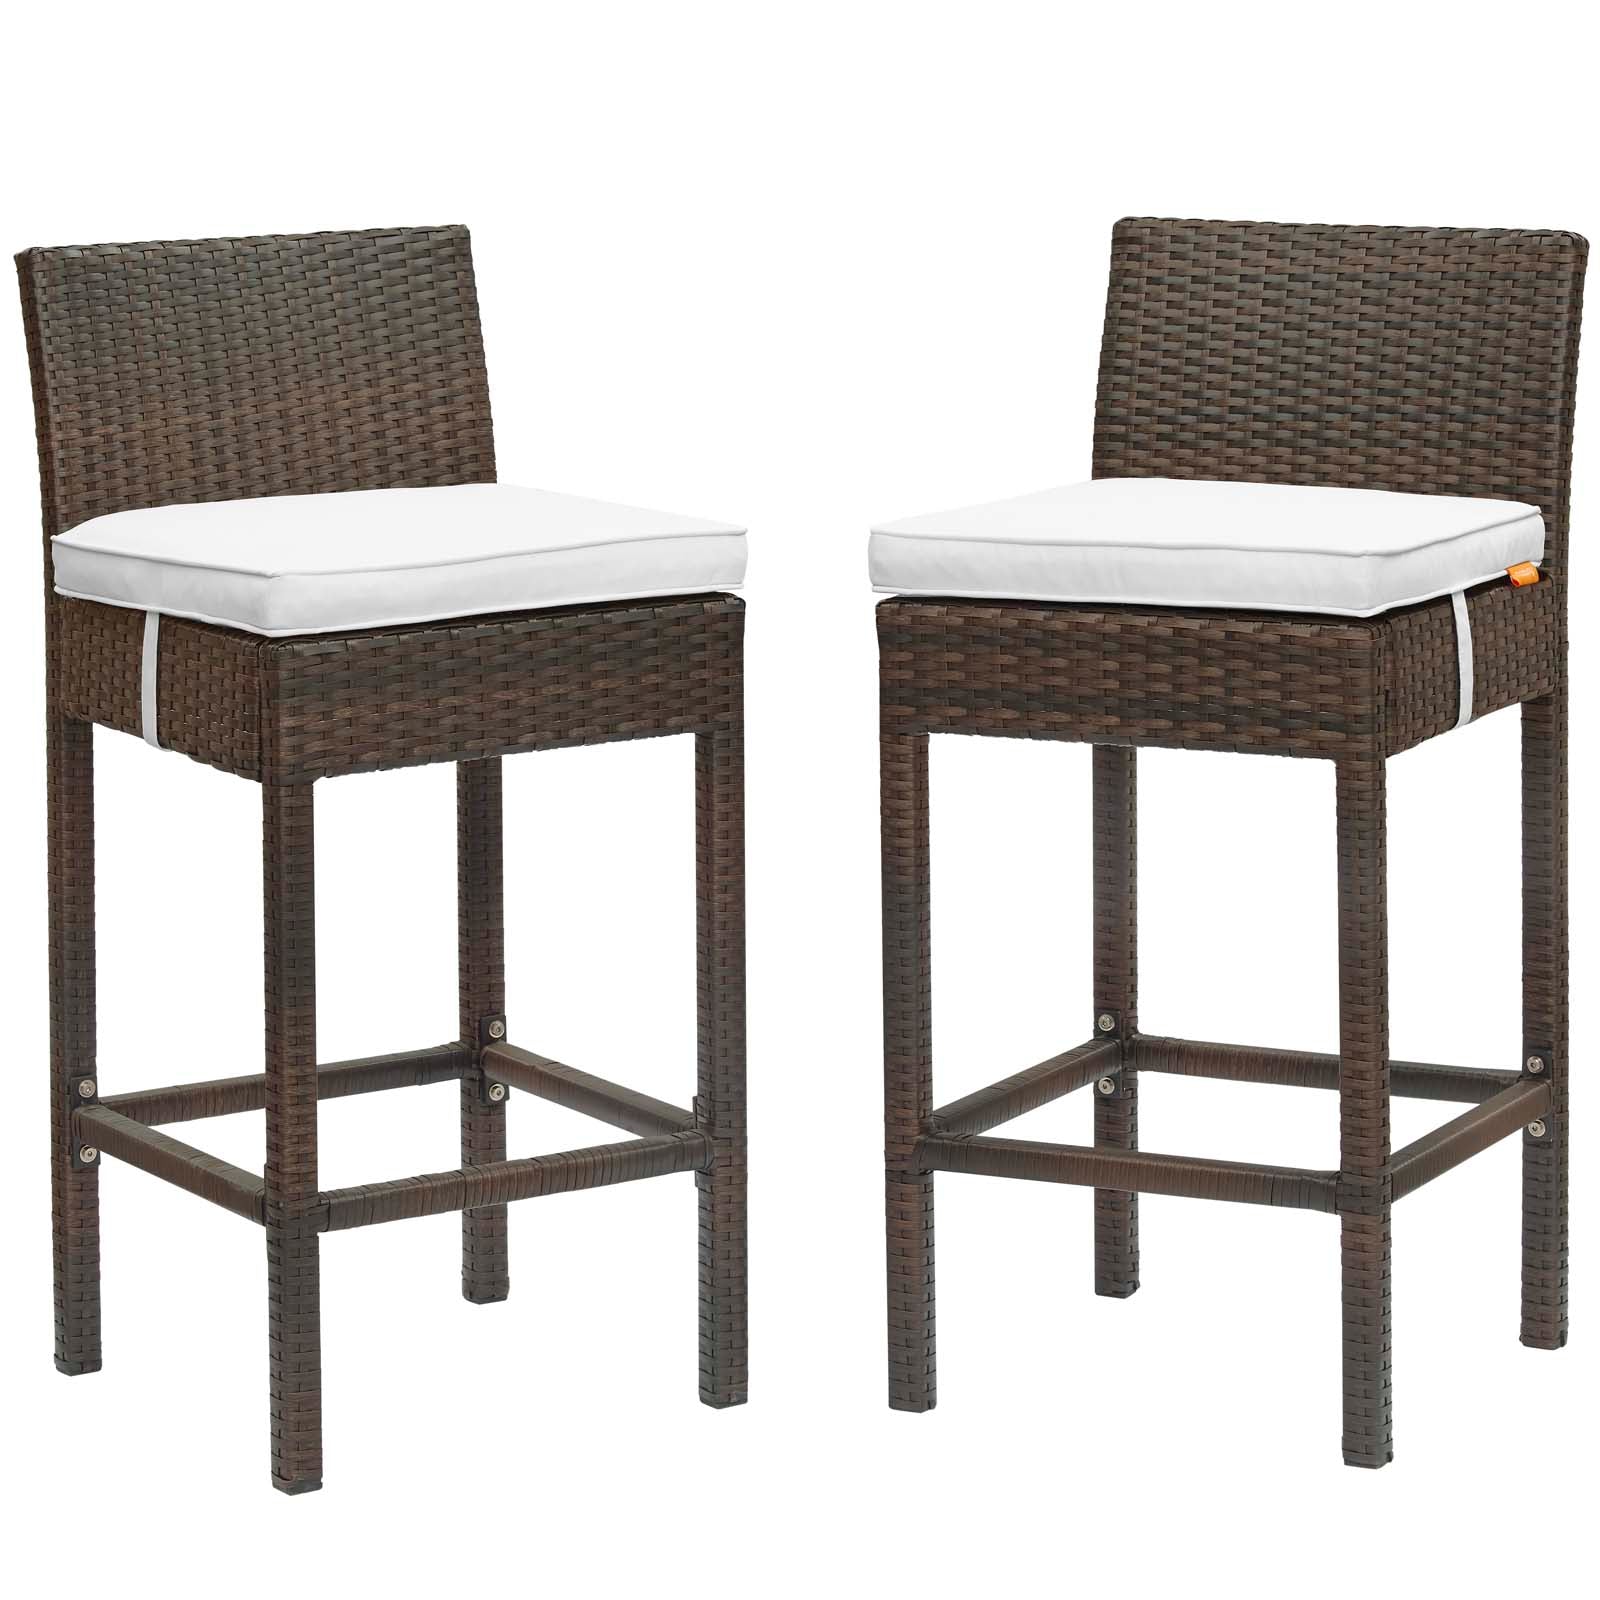 Modway Outdoor Barstools - Conduit Bar Stool Outdoor Patio Wicker Rattan Set of 2 Brown White